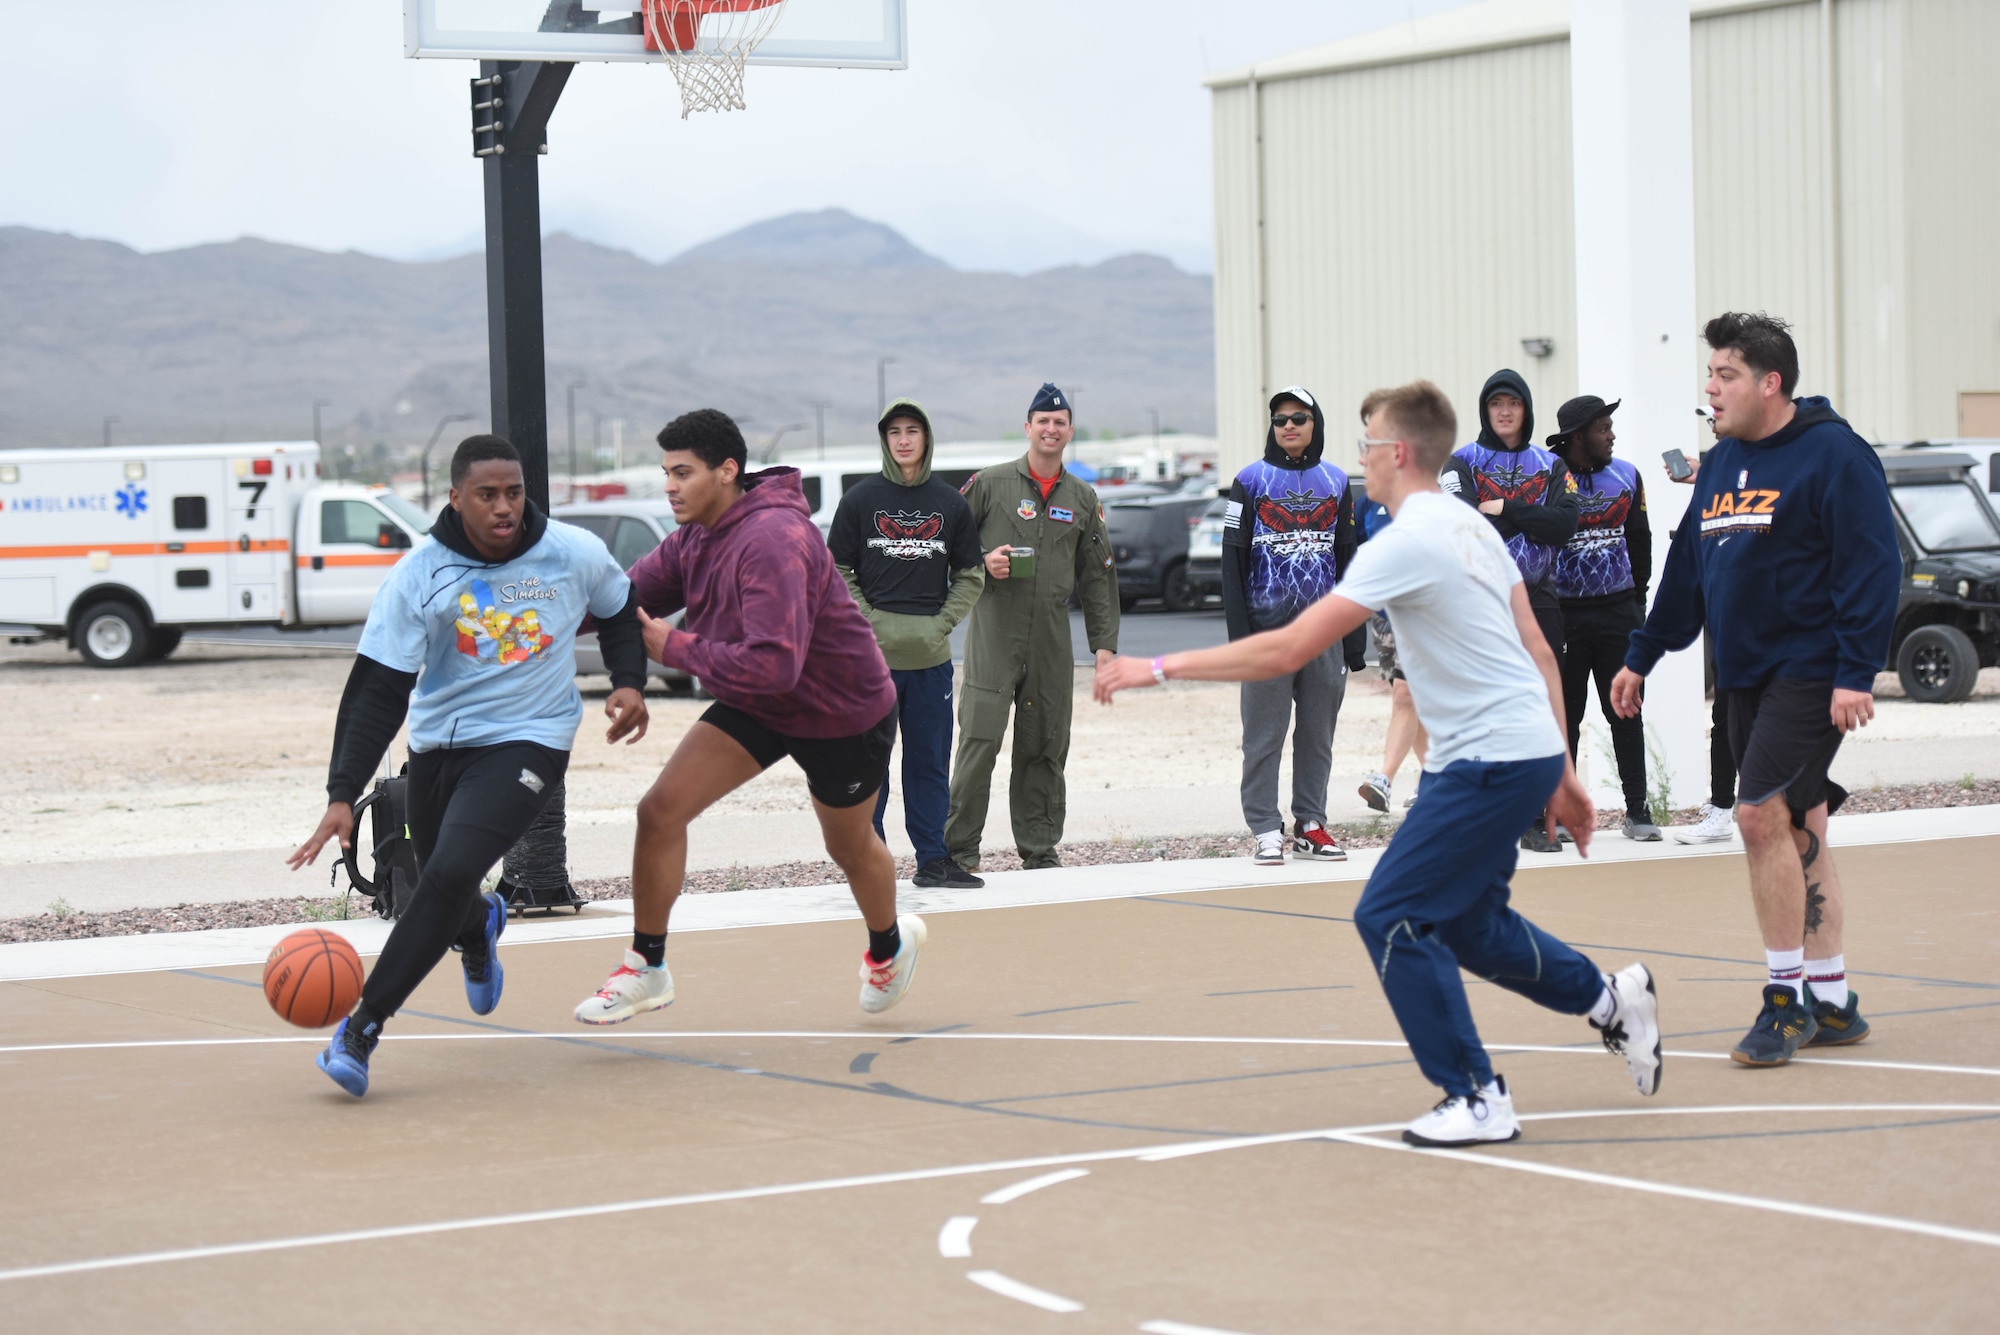 An airman dribbles a basketball past a defender during a basketball game.